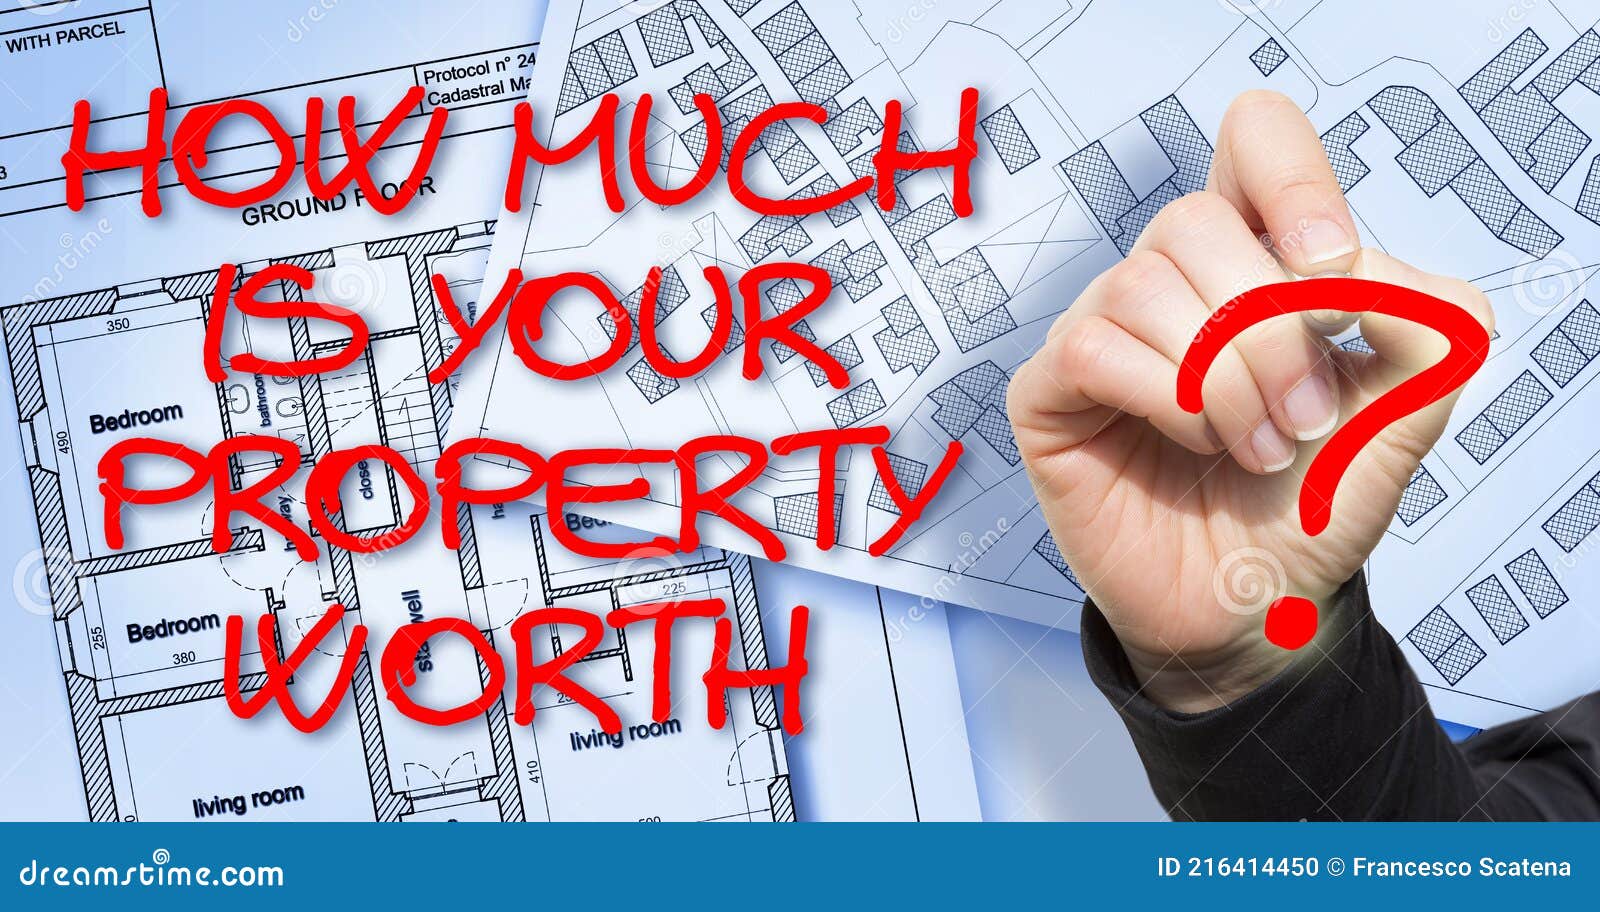 how much is a property worth